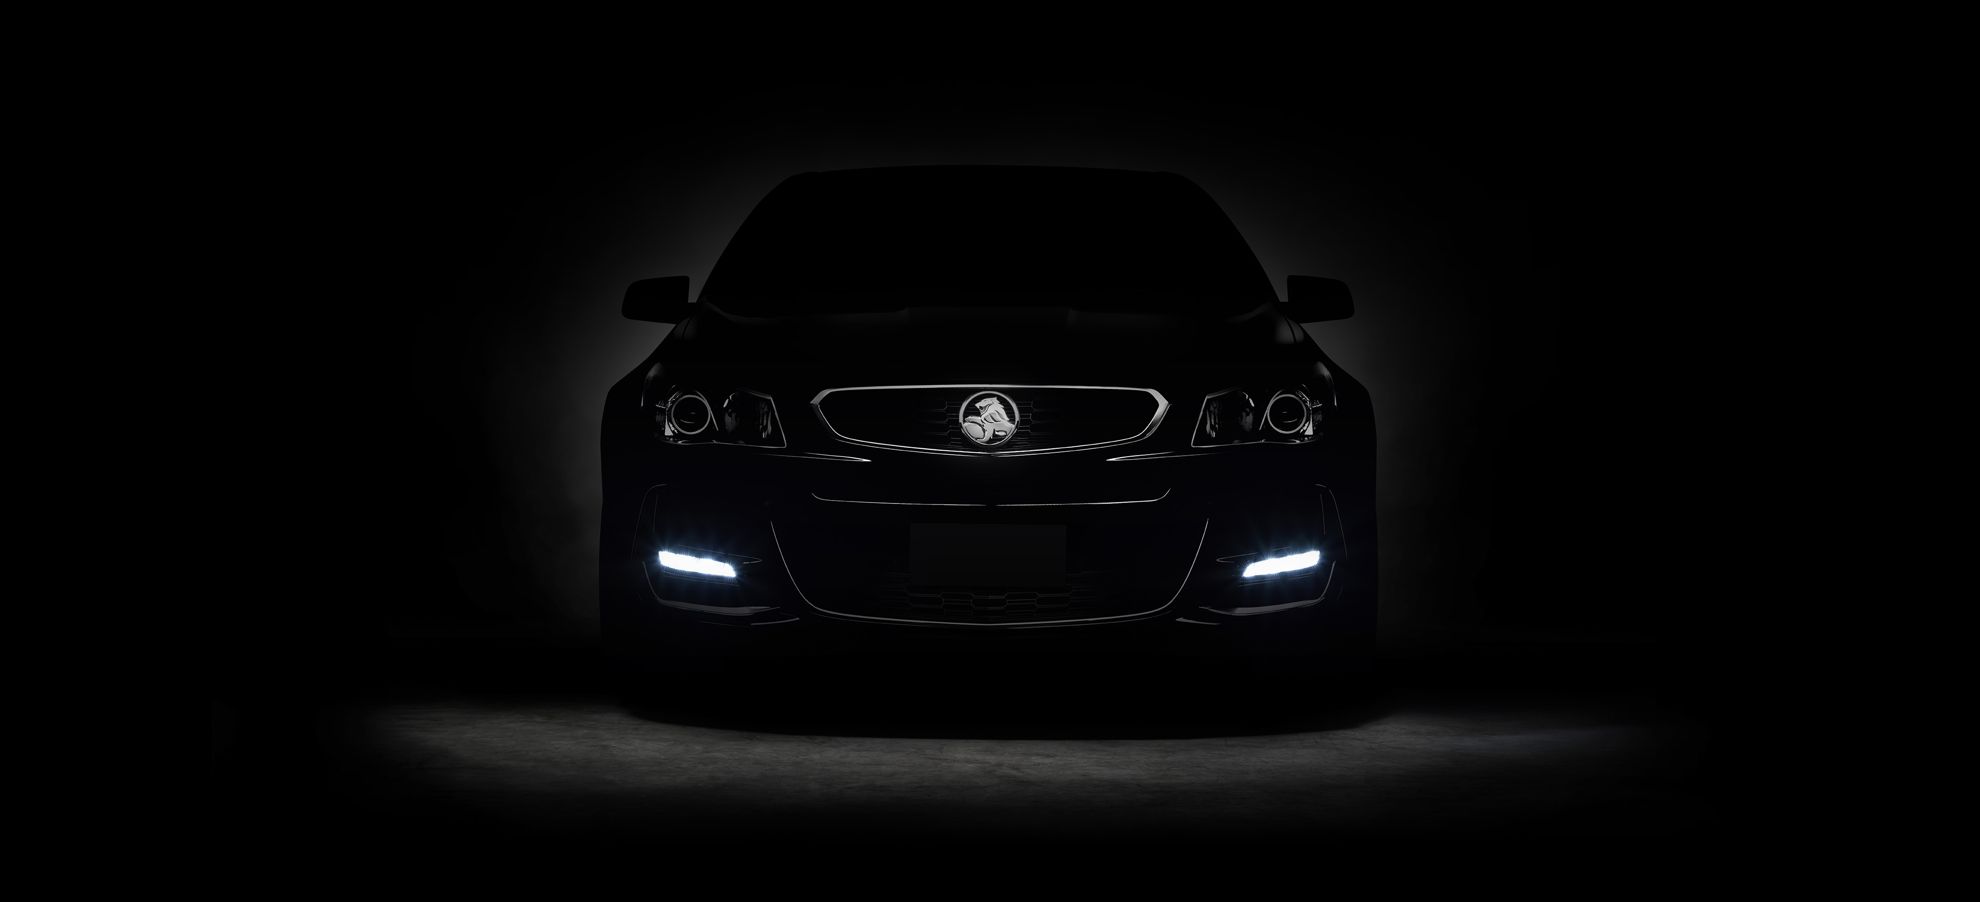 Holden Commodore VFII – The Countdown is on!